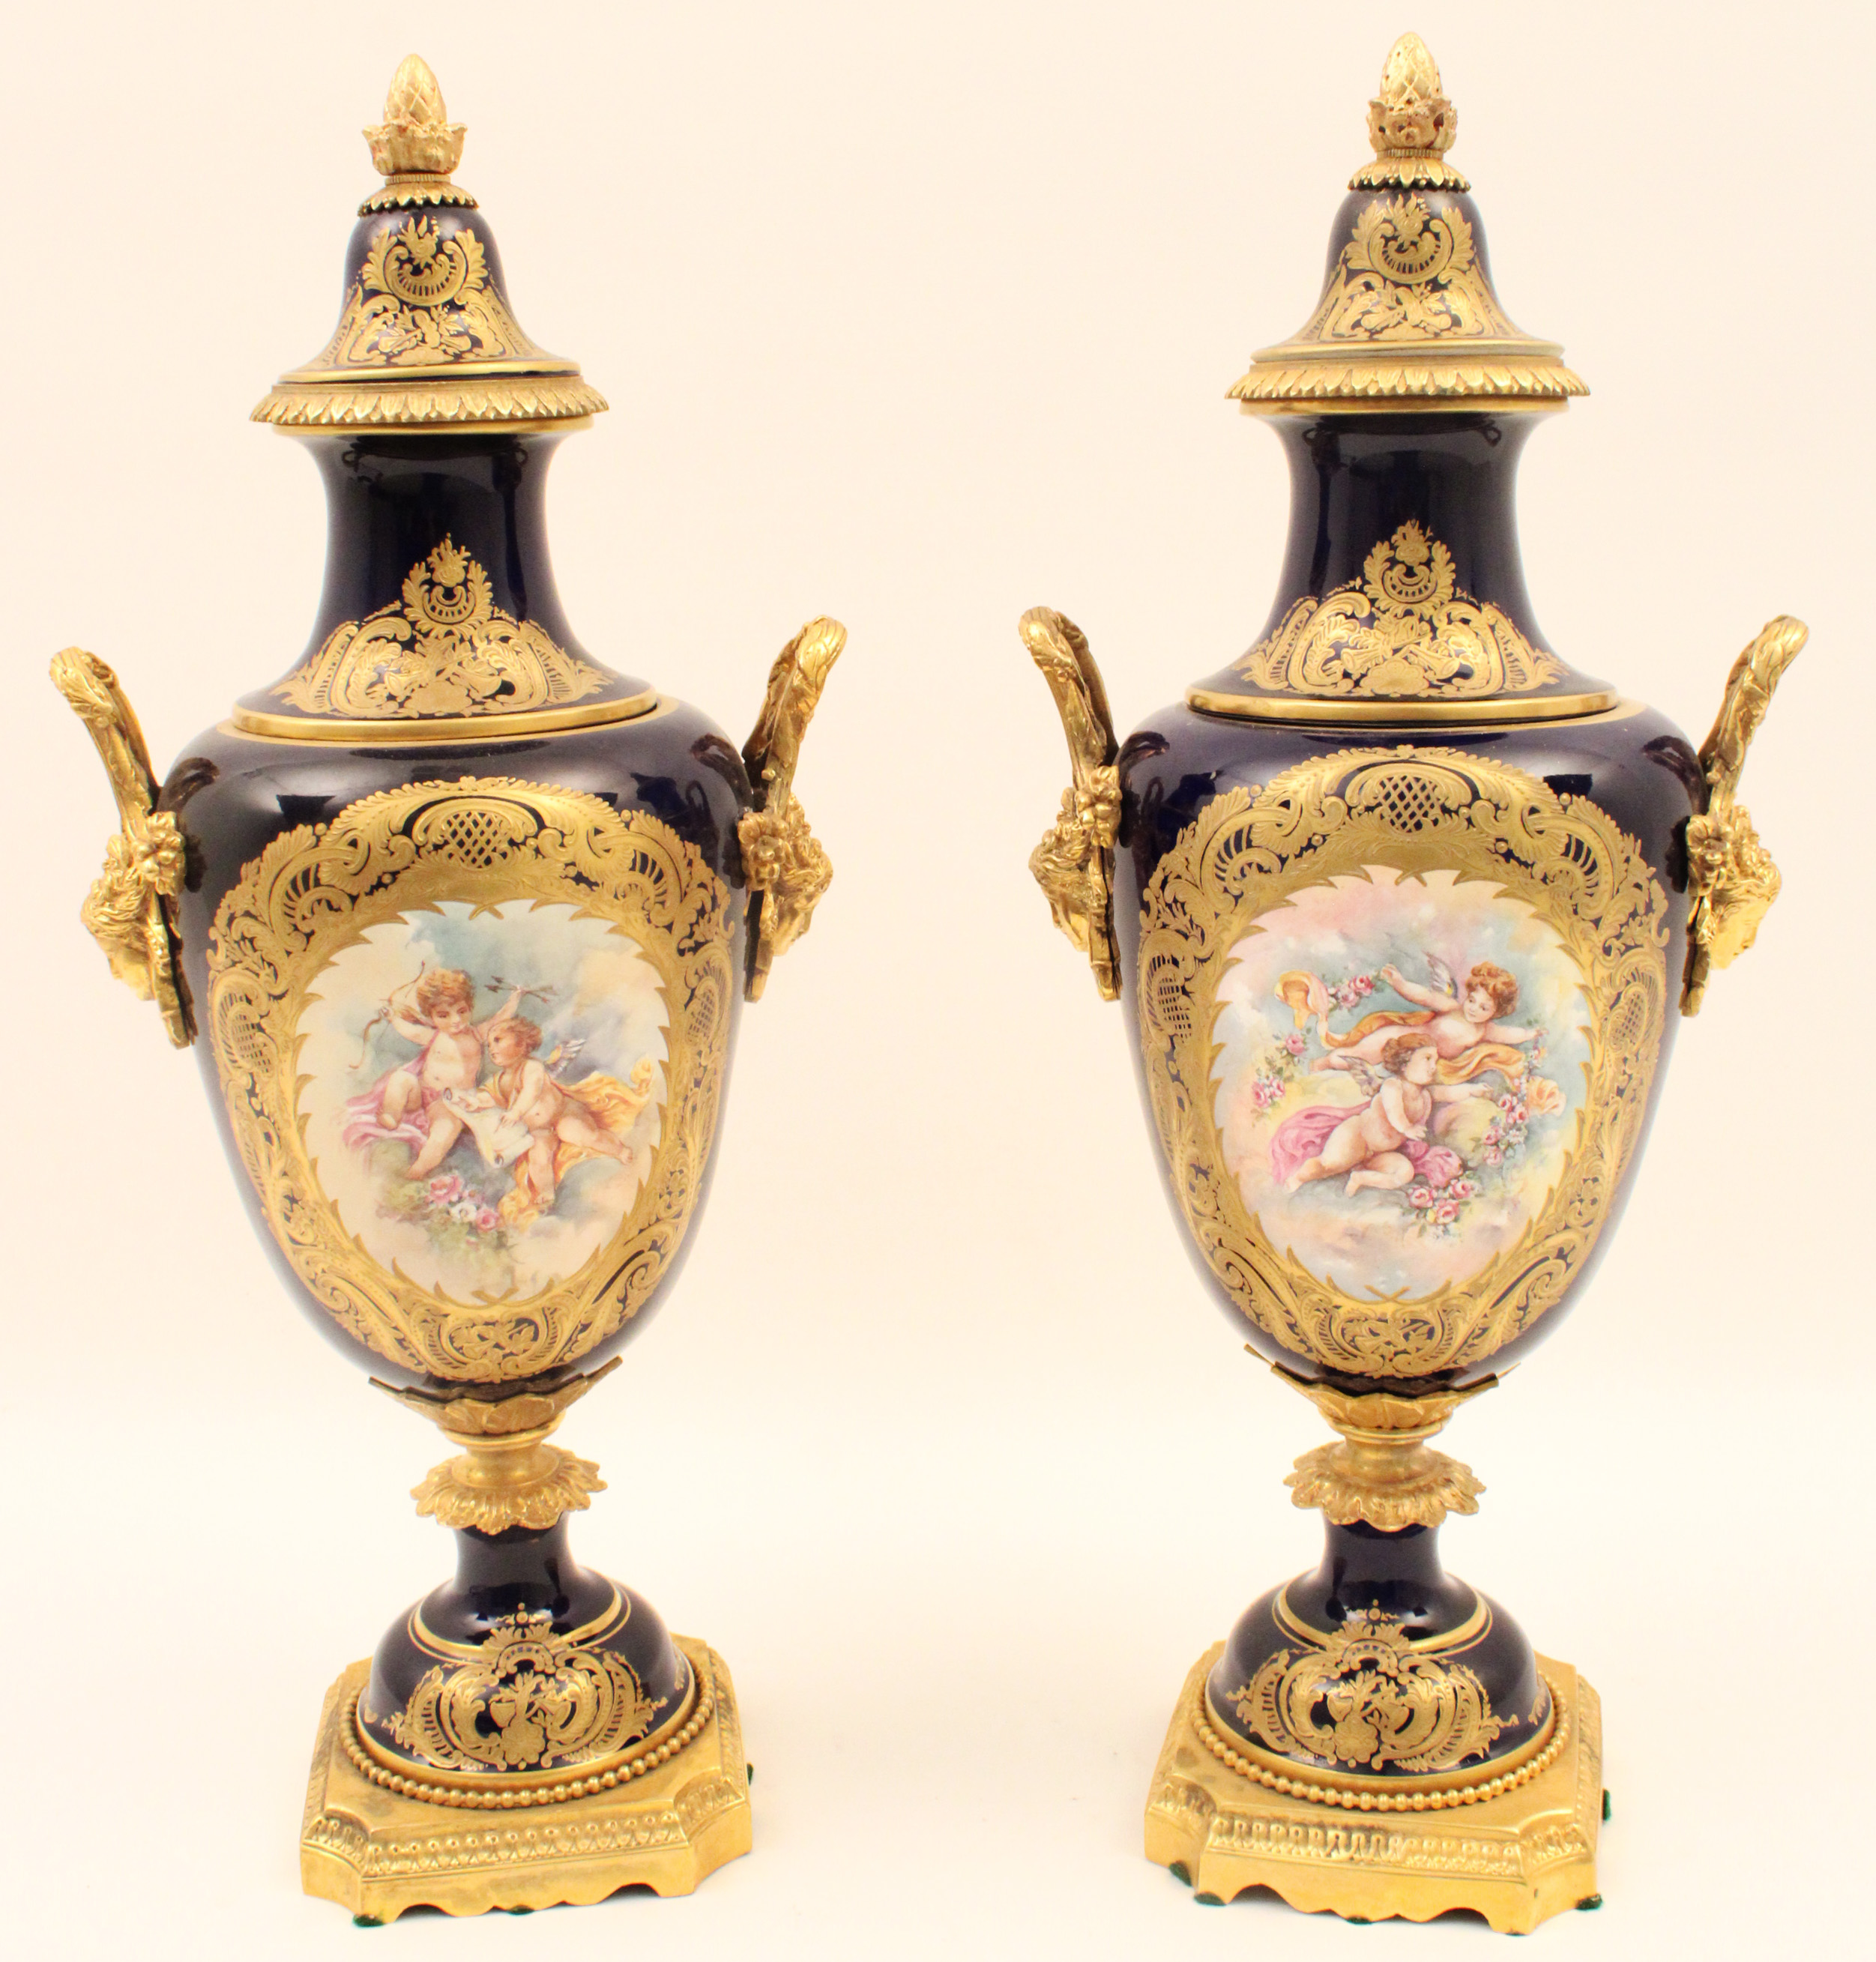 PR OF FRENCH SEVRES STYLE PORCELAIN 35e7bf